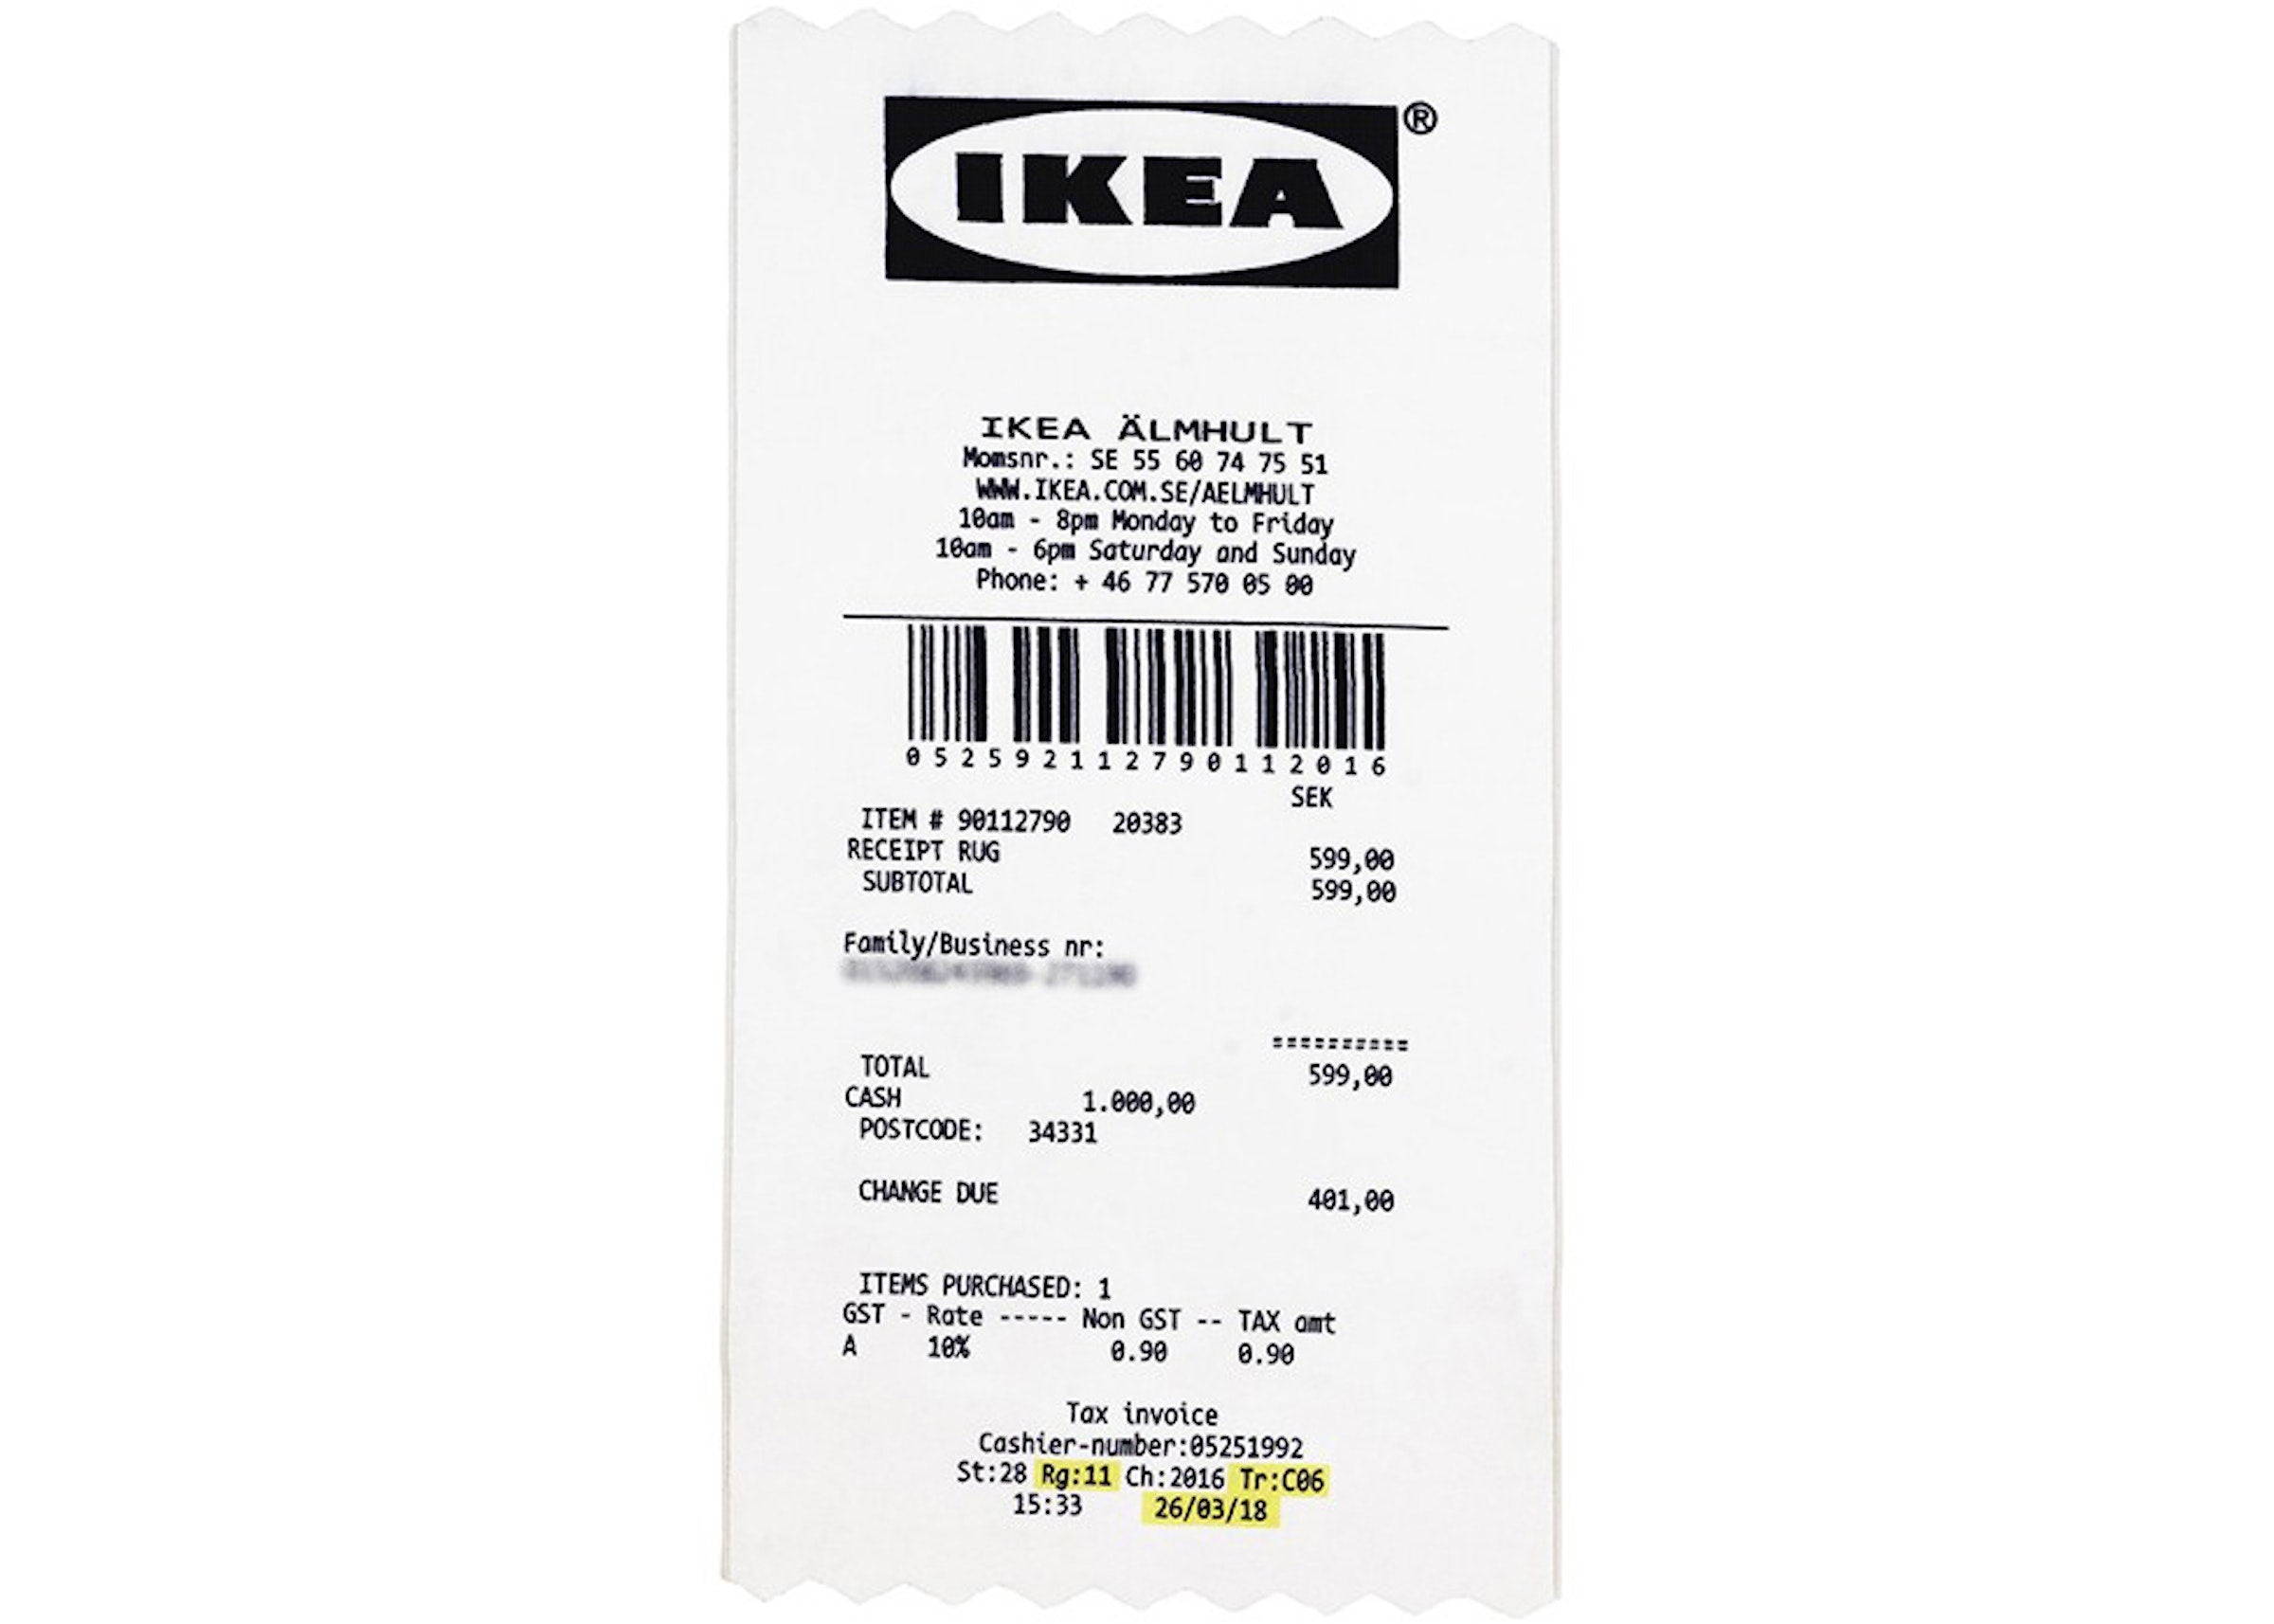 Virgil Abloh, Four Abloh chairs model 499 from the Markerad collection  for IKEA, 2019. - Bukowskis